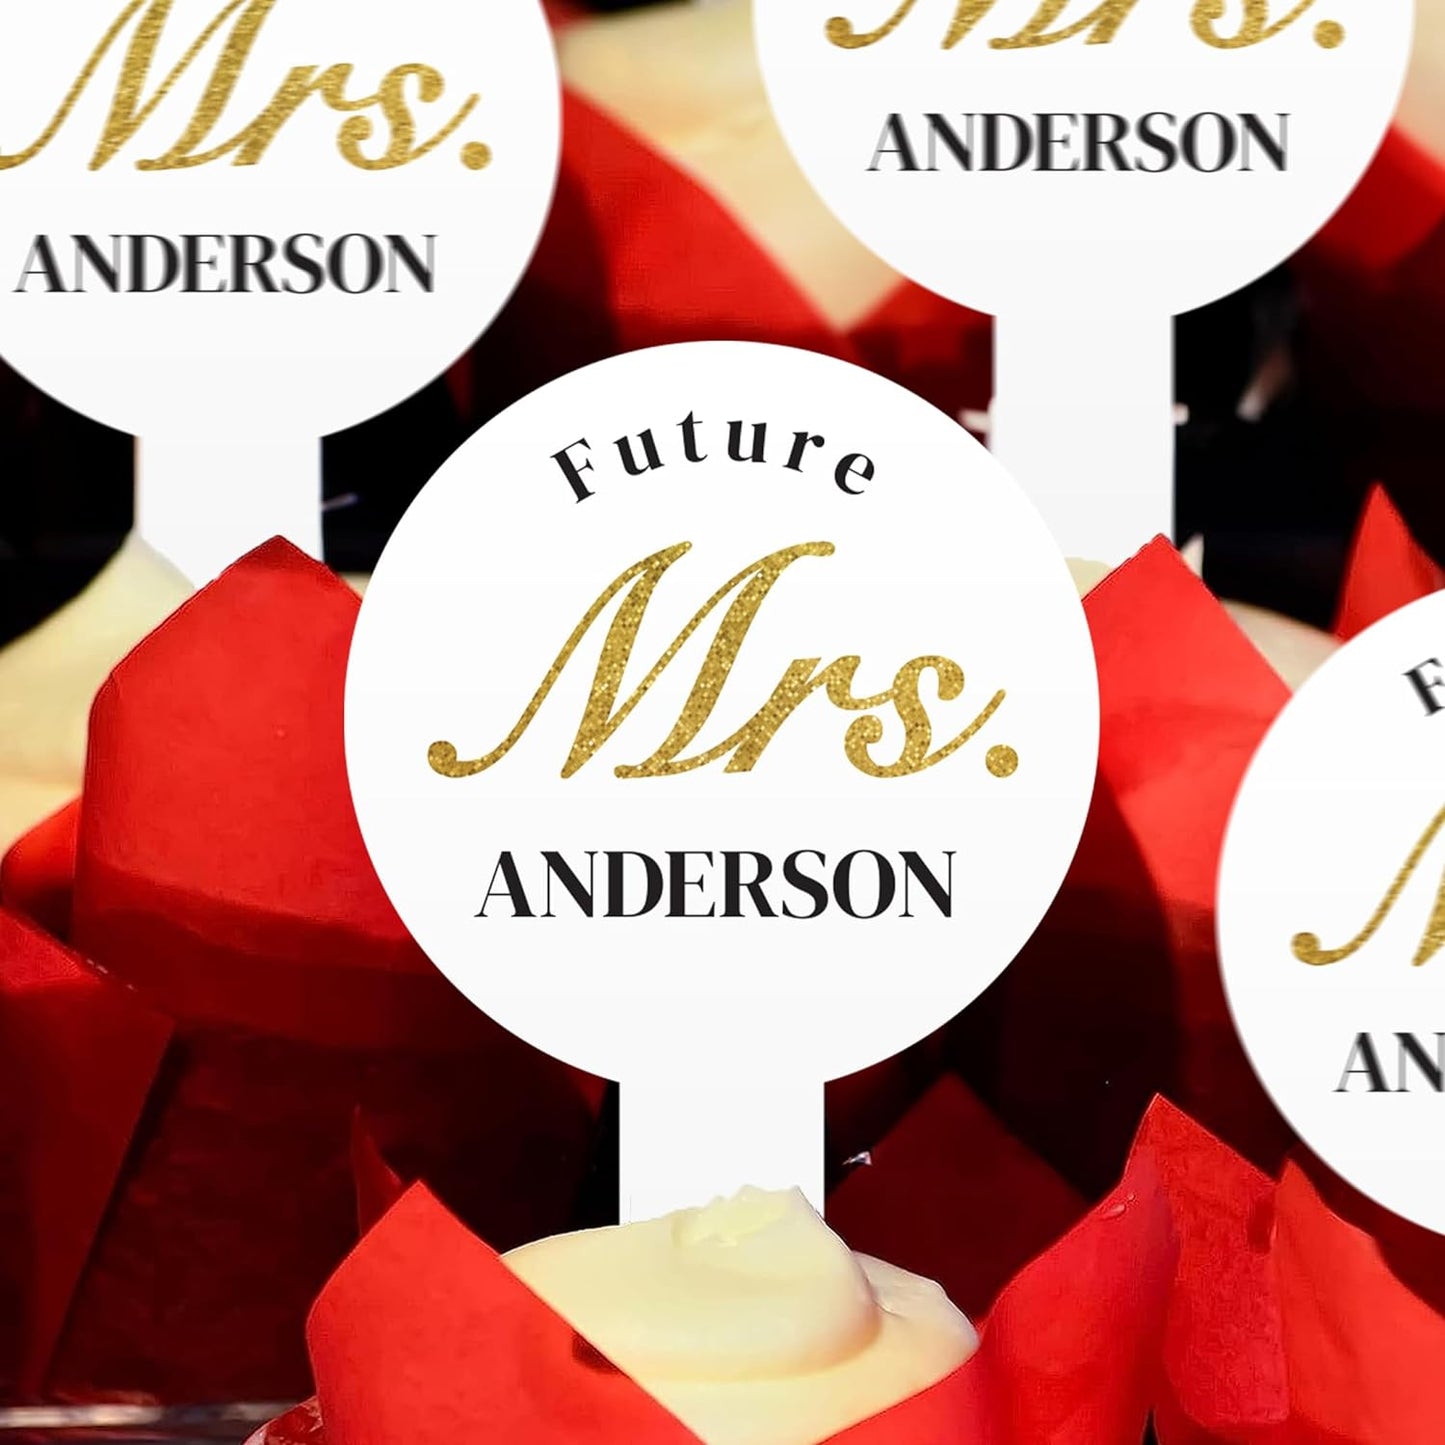 Future Mrs. [Your Name] Dessert Cupcake Toppers